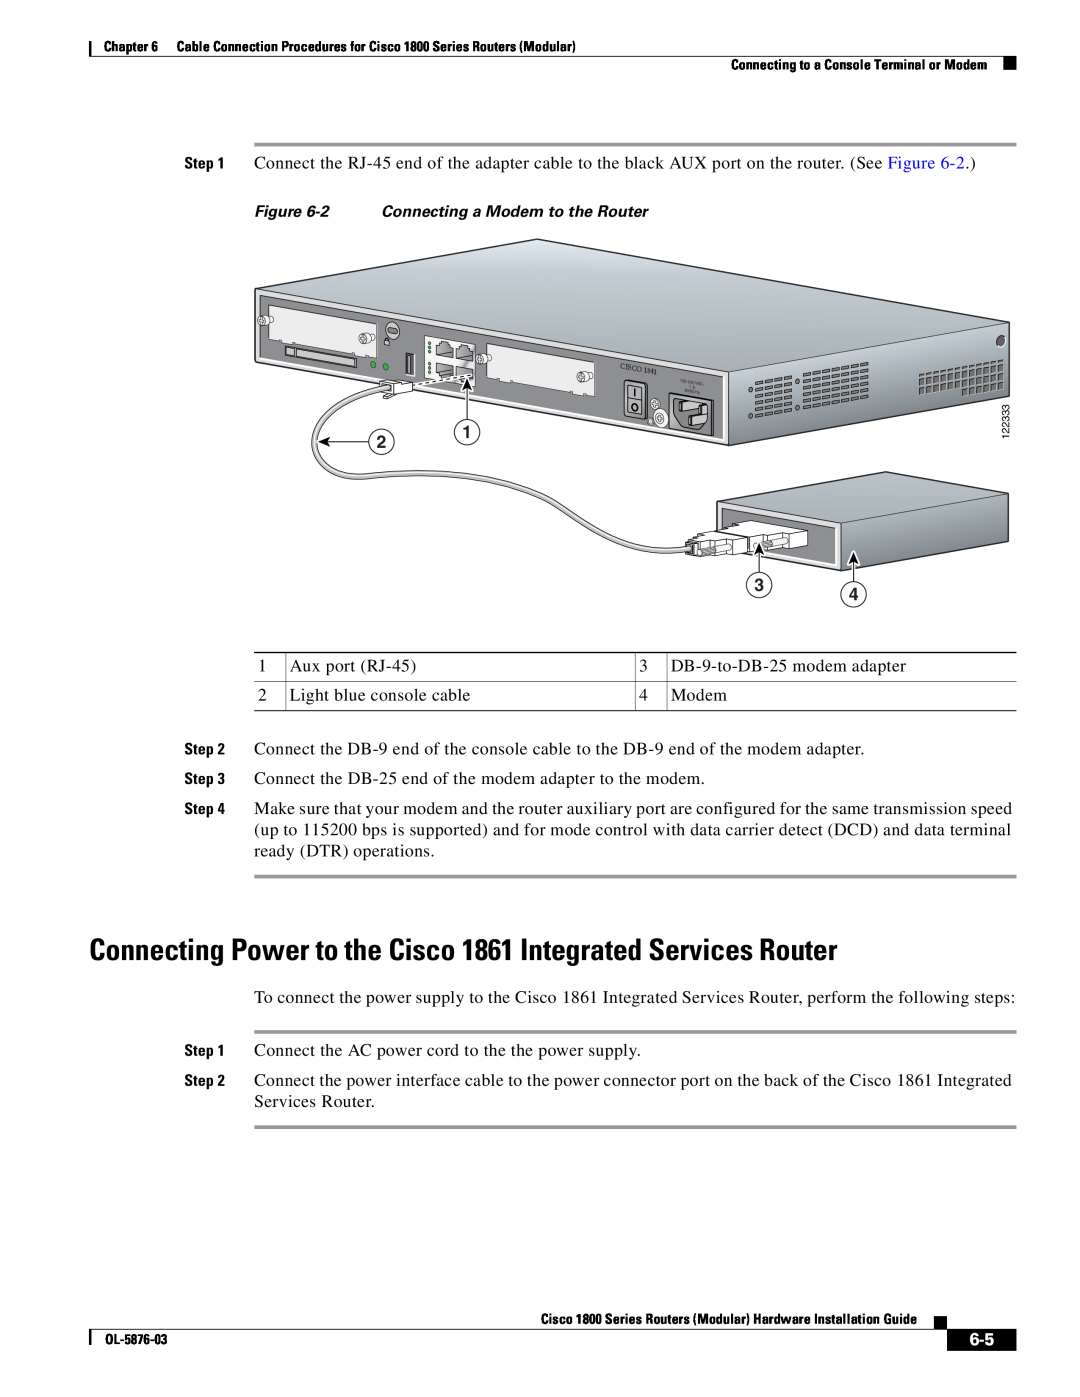 Cisco Systems CISCO1841-HSEC/K9-RF manual Connecting Power to the Cisco 1861 Integrated Services Router 